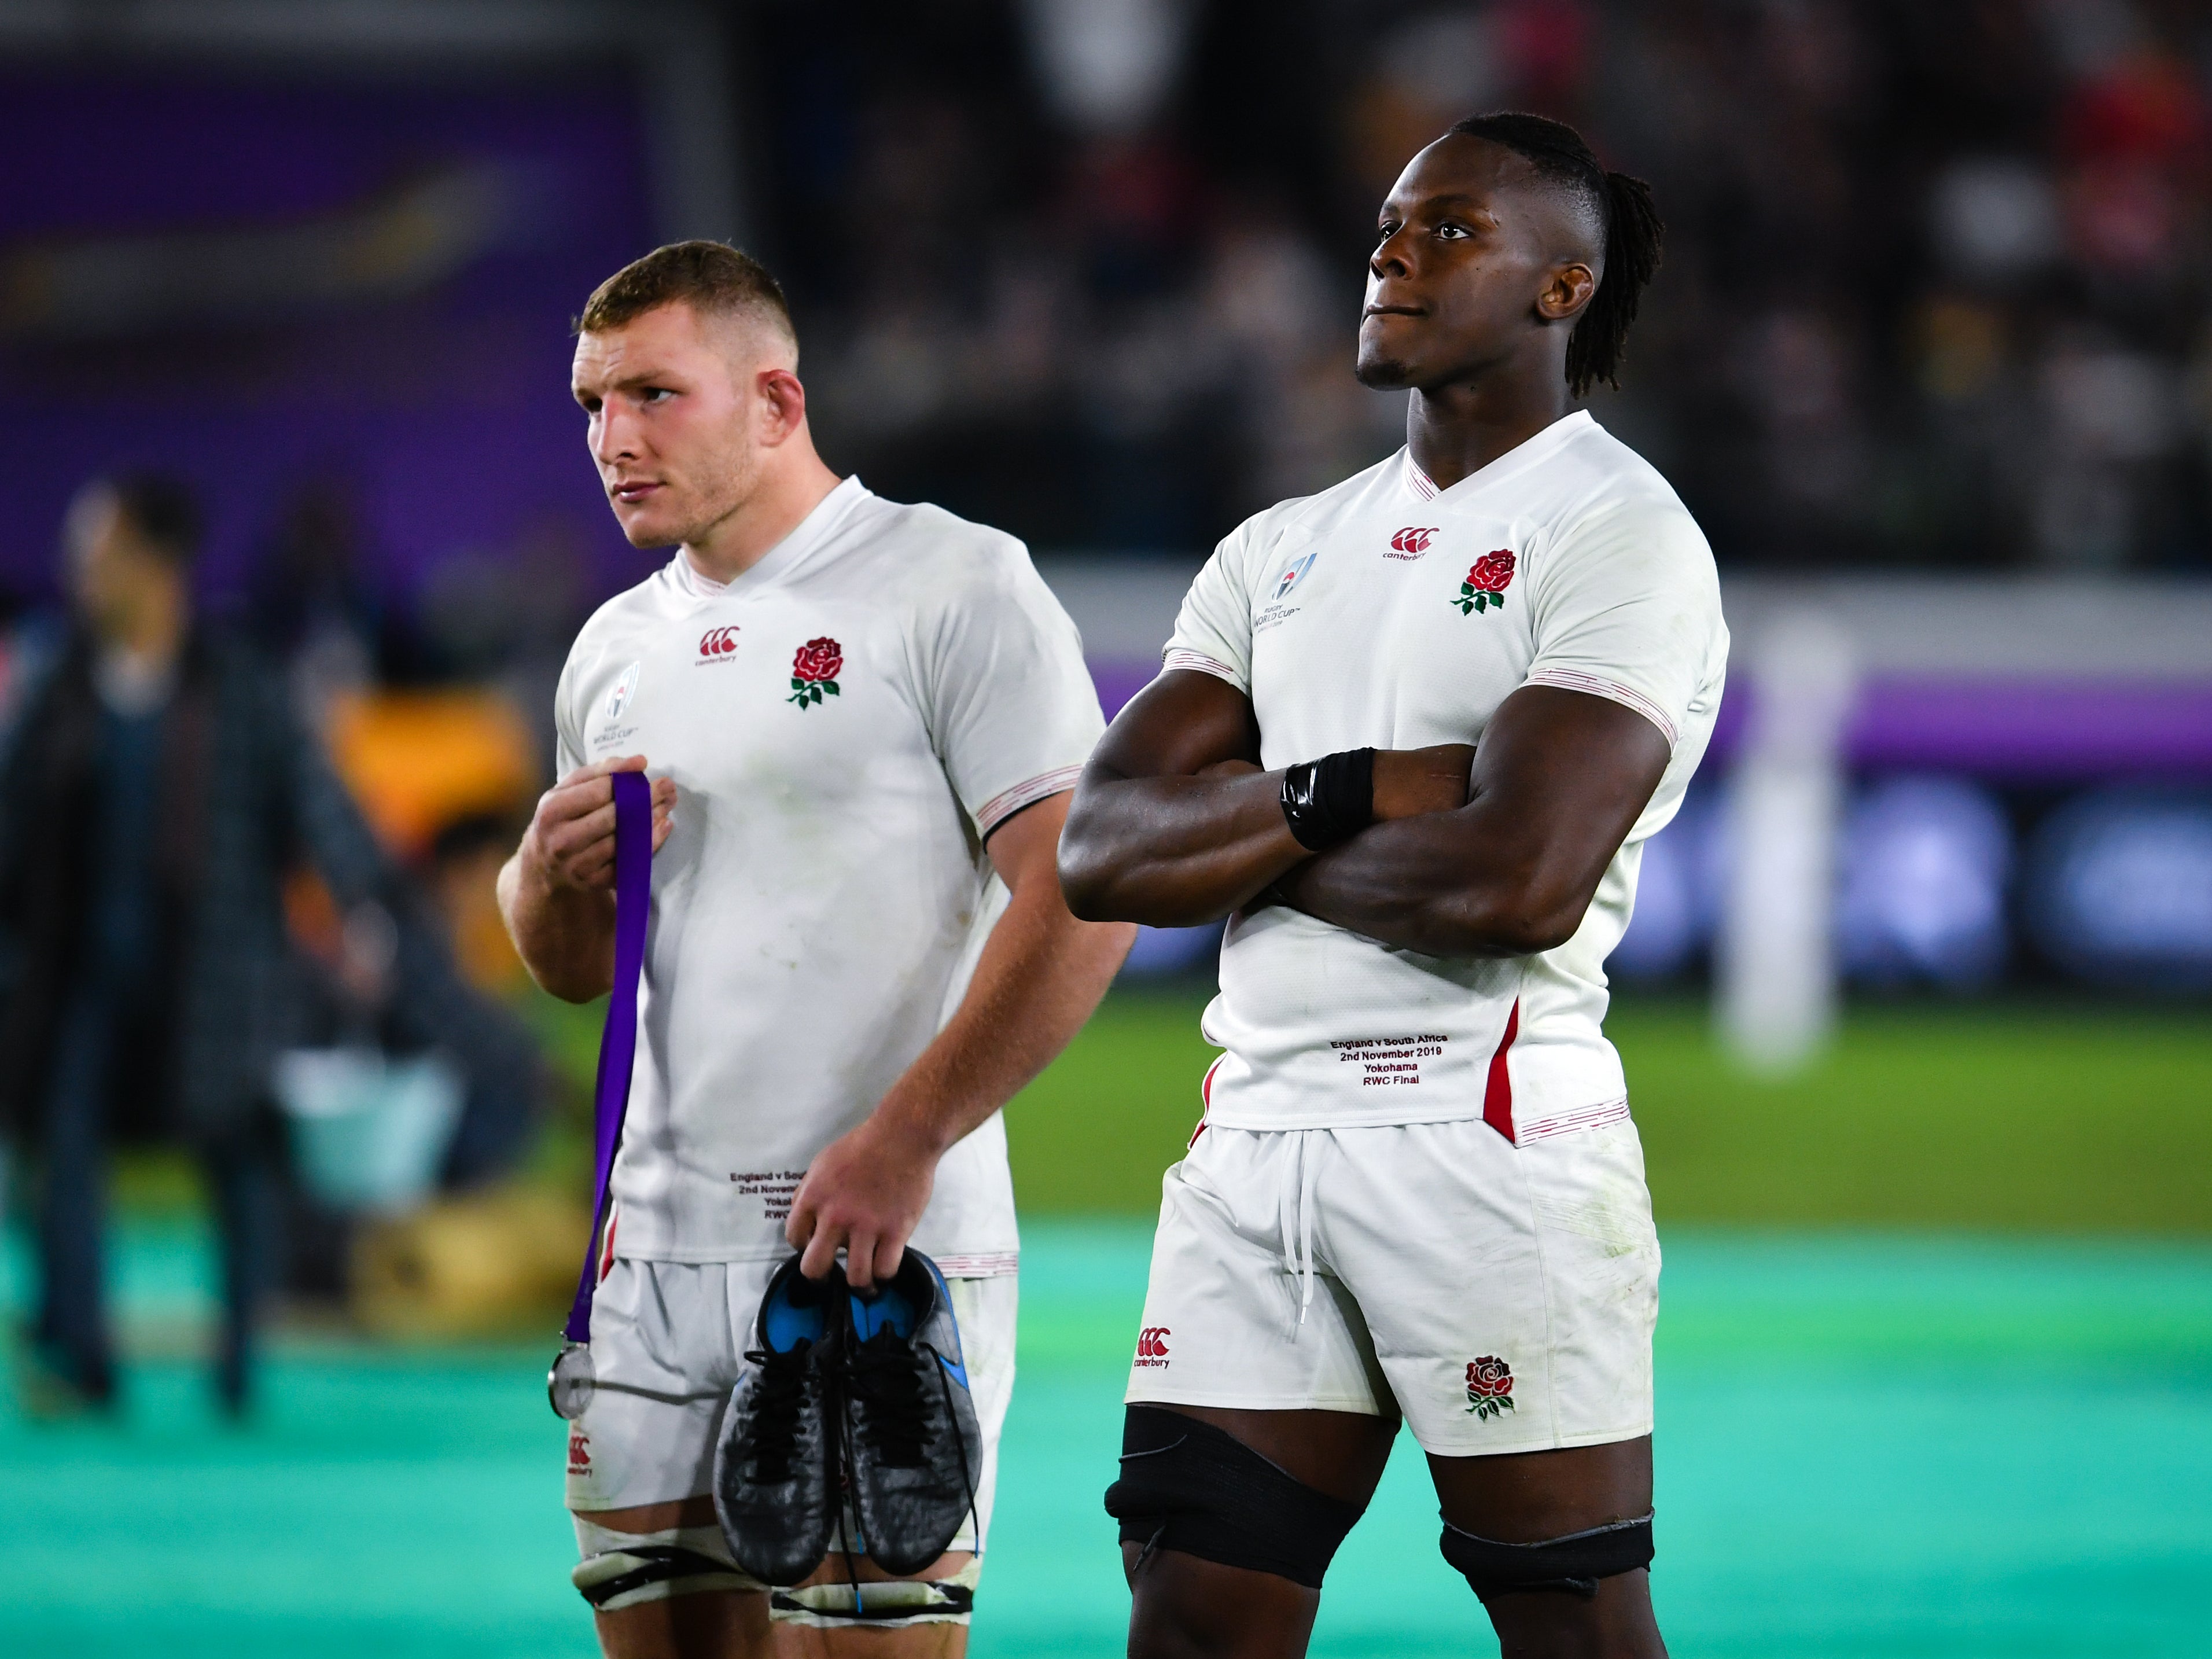 Sam Underhill (left) and Maro Itoje (right) were concussed in England’s second Test against Australia (Ashley Western/PA)